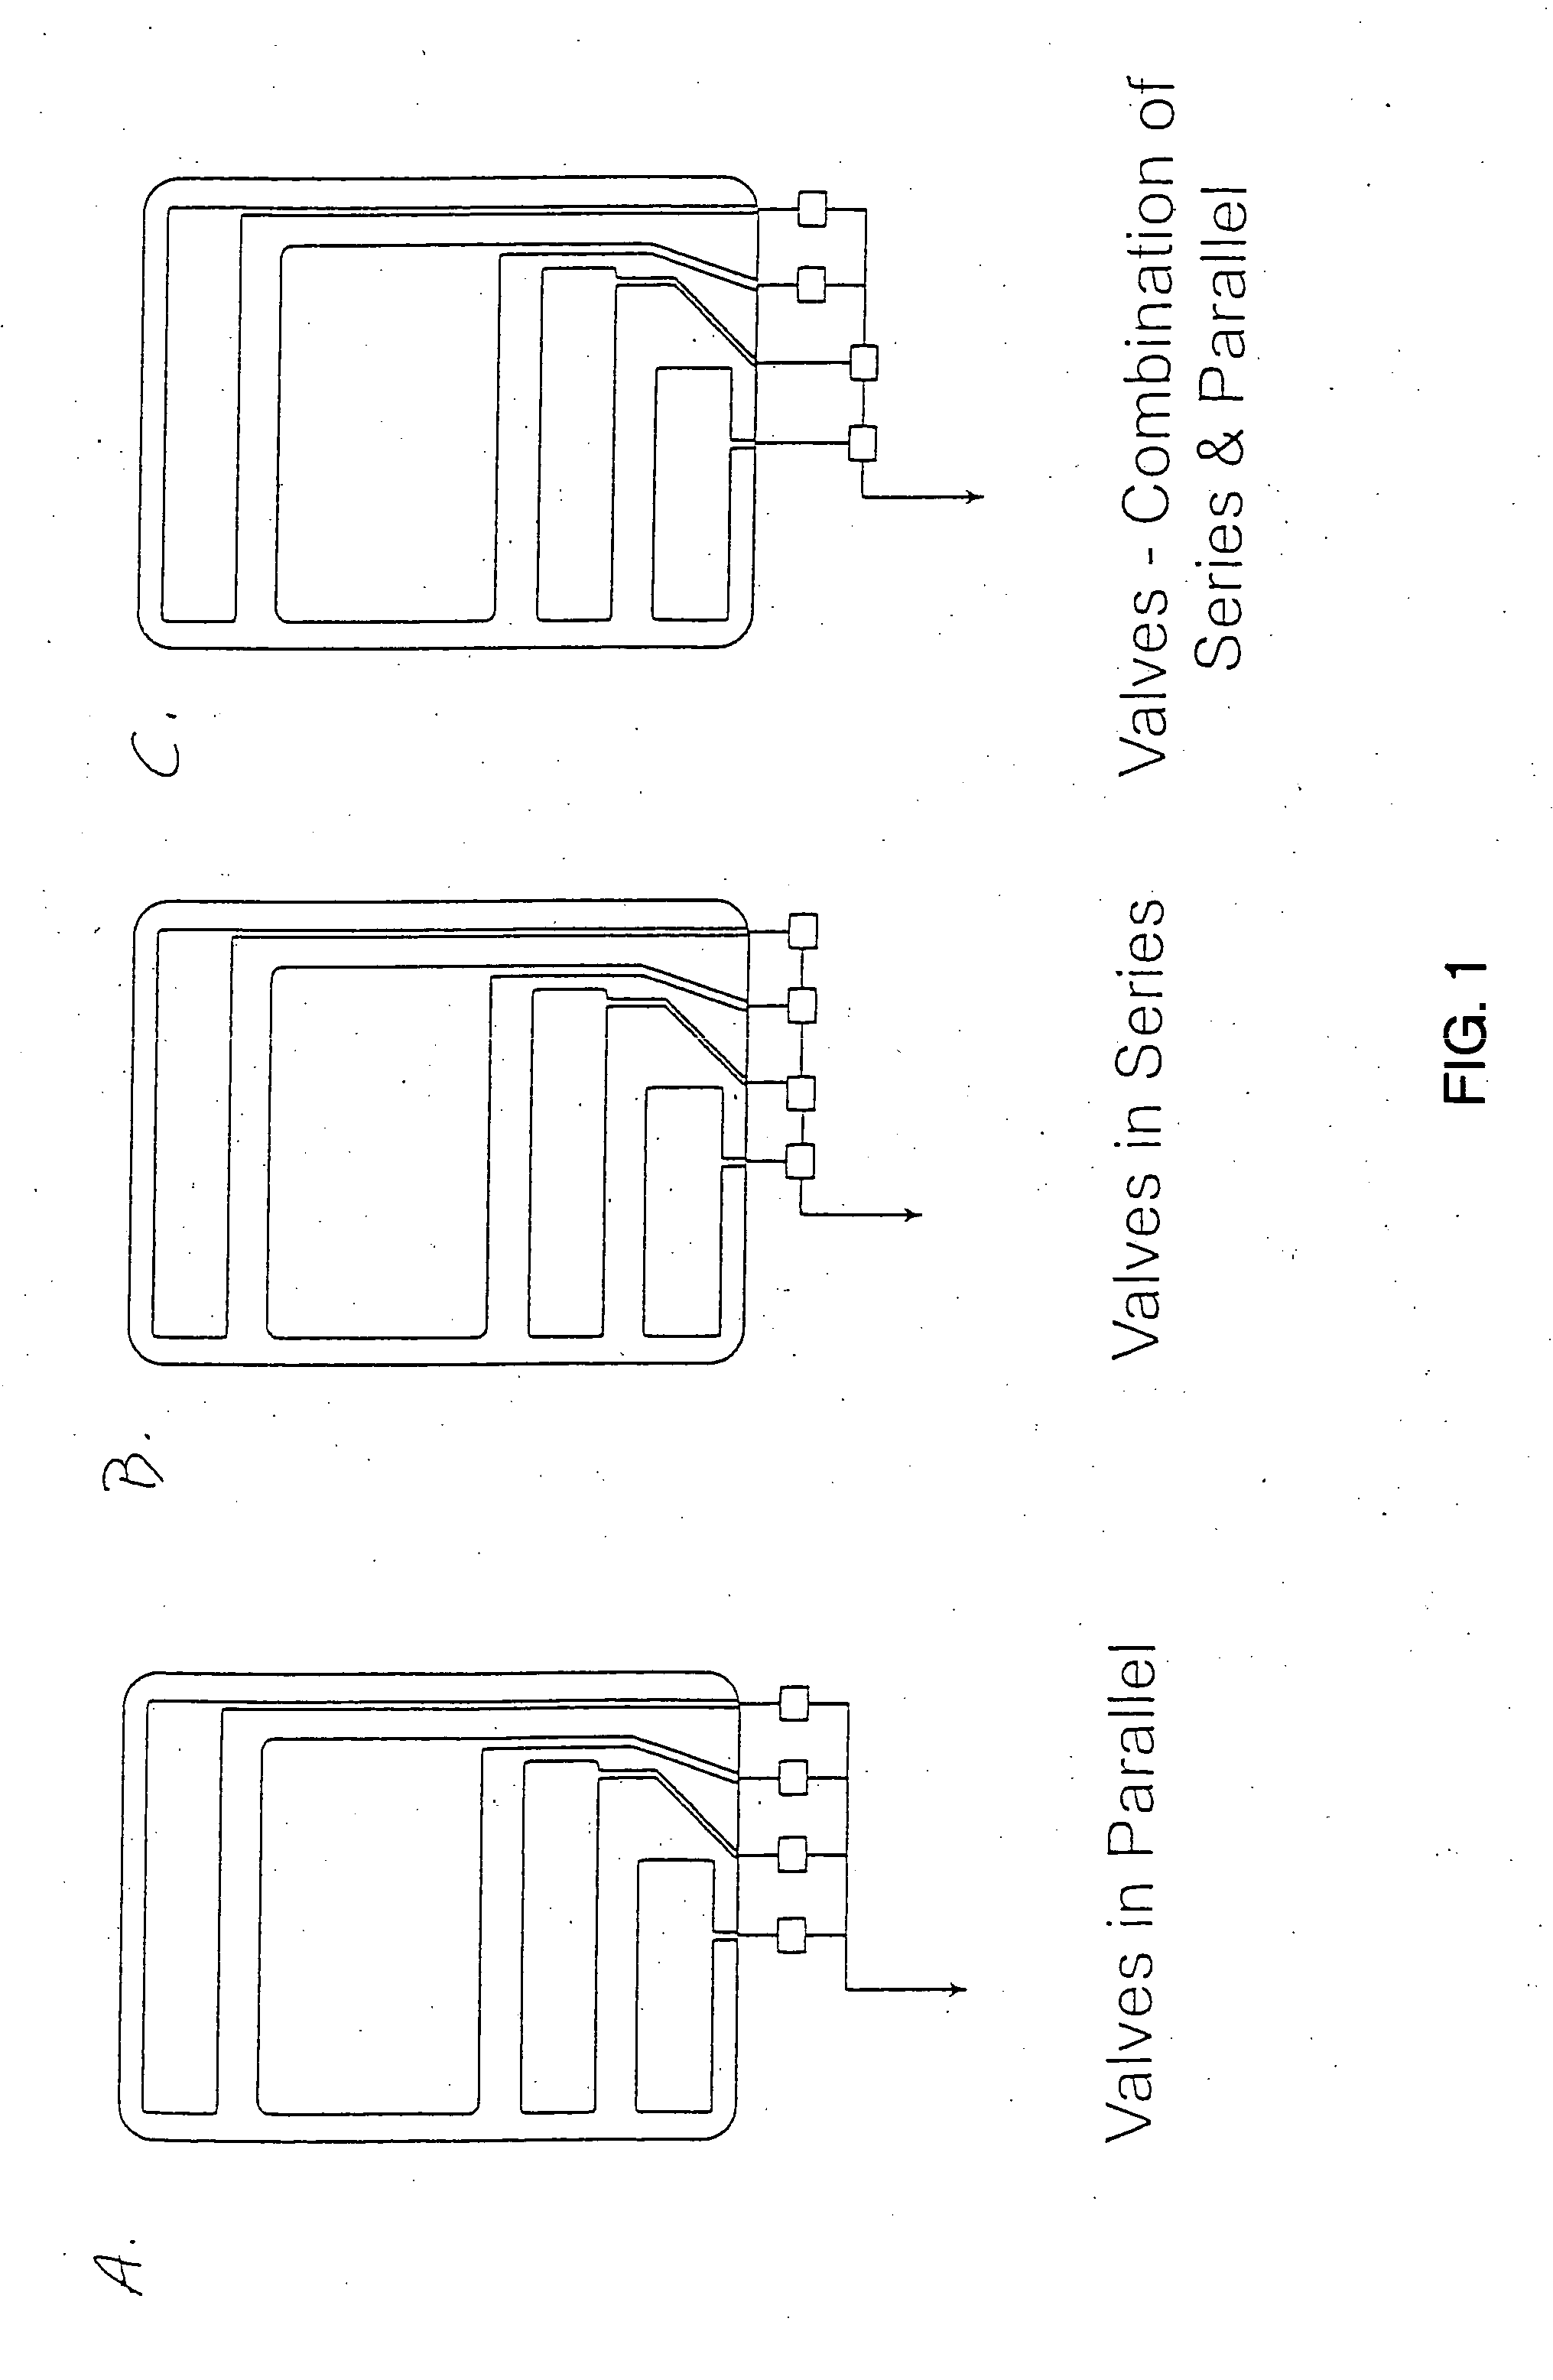 Medication delivery apparatus and methods for intravenous infusions